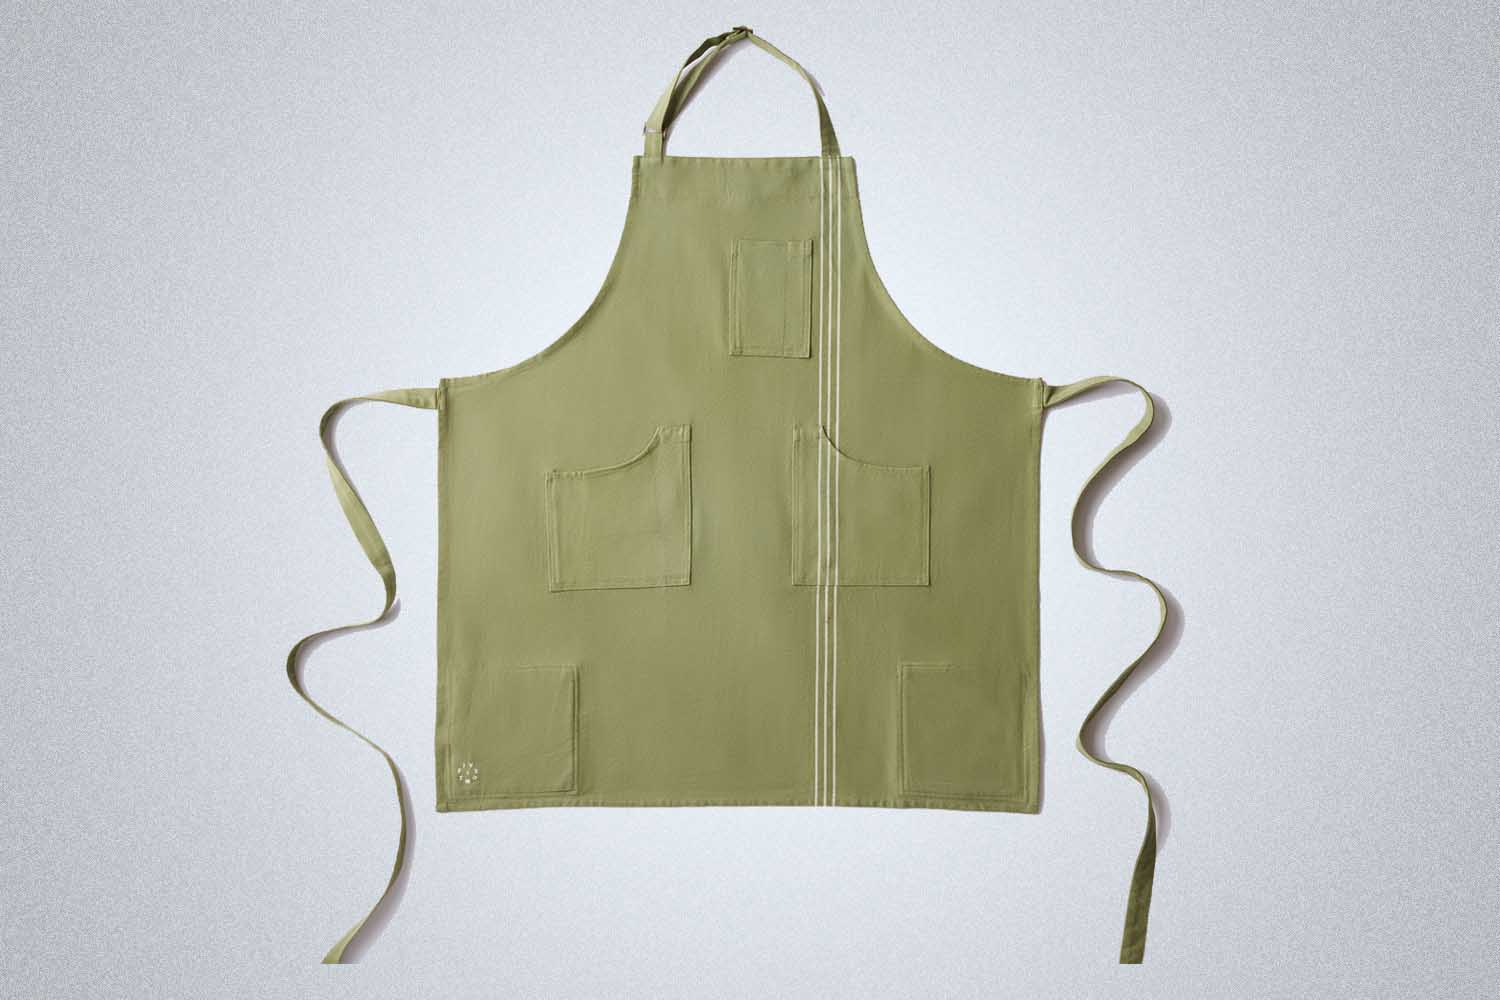 https://www.insidehook.com/wp-content/uploads/2023/03/Five-Two-Ultimate-Apron-with-Built-In-Pot-Holders-.jpg?fit=1200%2C800